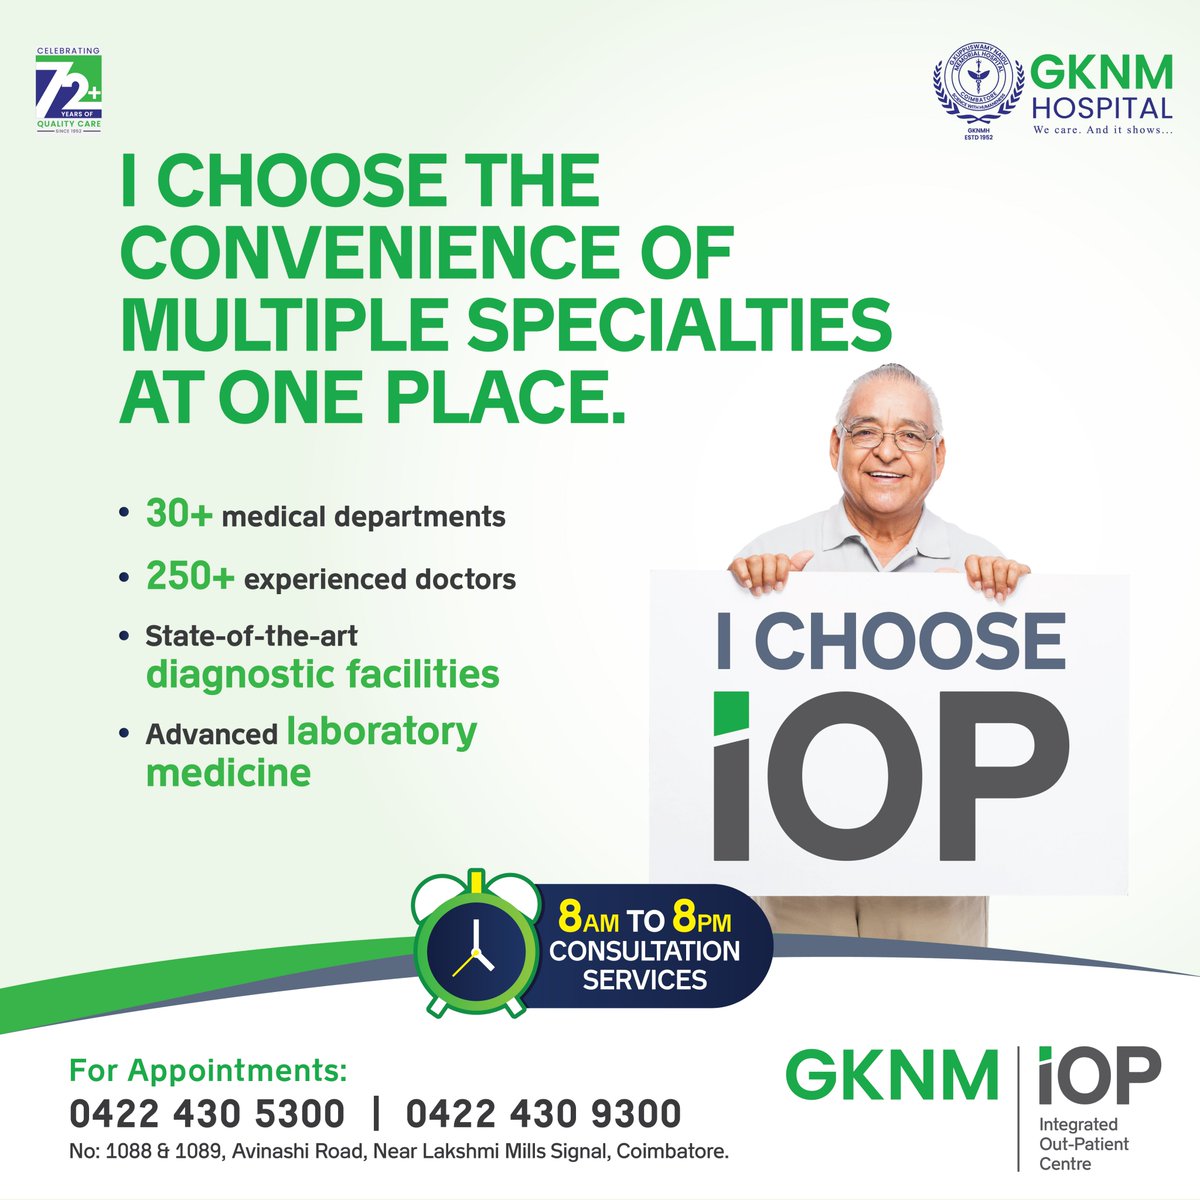 Catering to all your healthcare requirements under one roof! With excellent care and a patient-centric approach, experience a smooth and supportive healthcare journey with #GKNMiOP ! To Know More - gknmhospital.org/iop/ For Appointments - 0422 430 5300 / 0422 430 9300 #GKNM